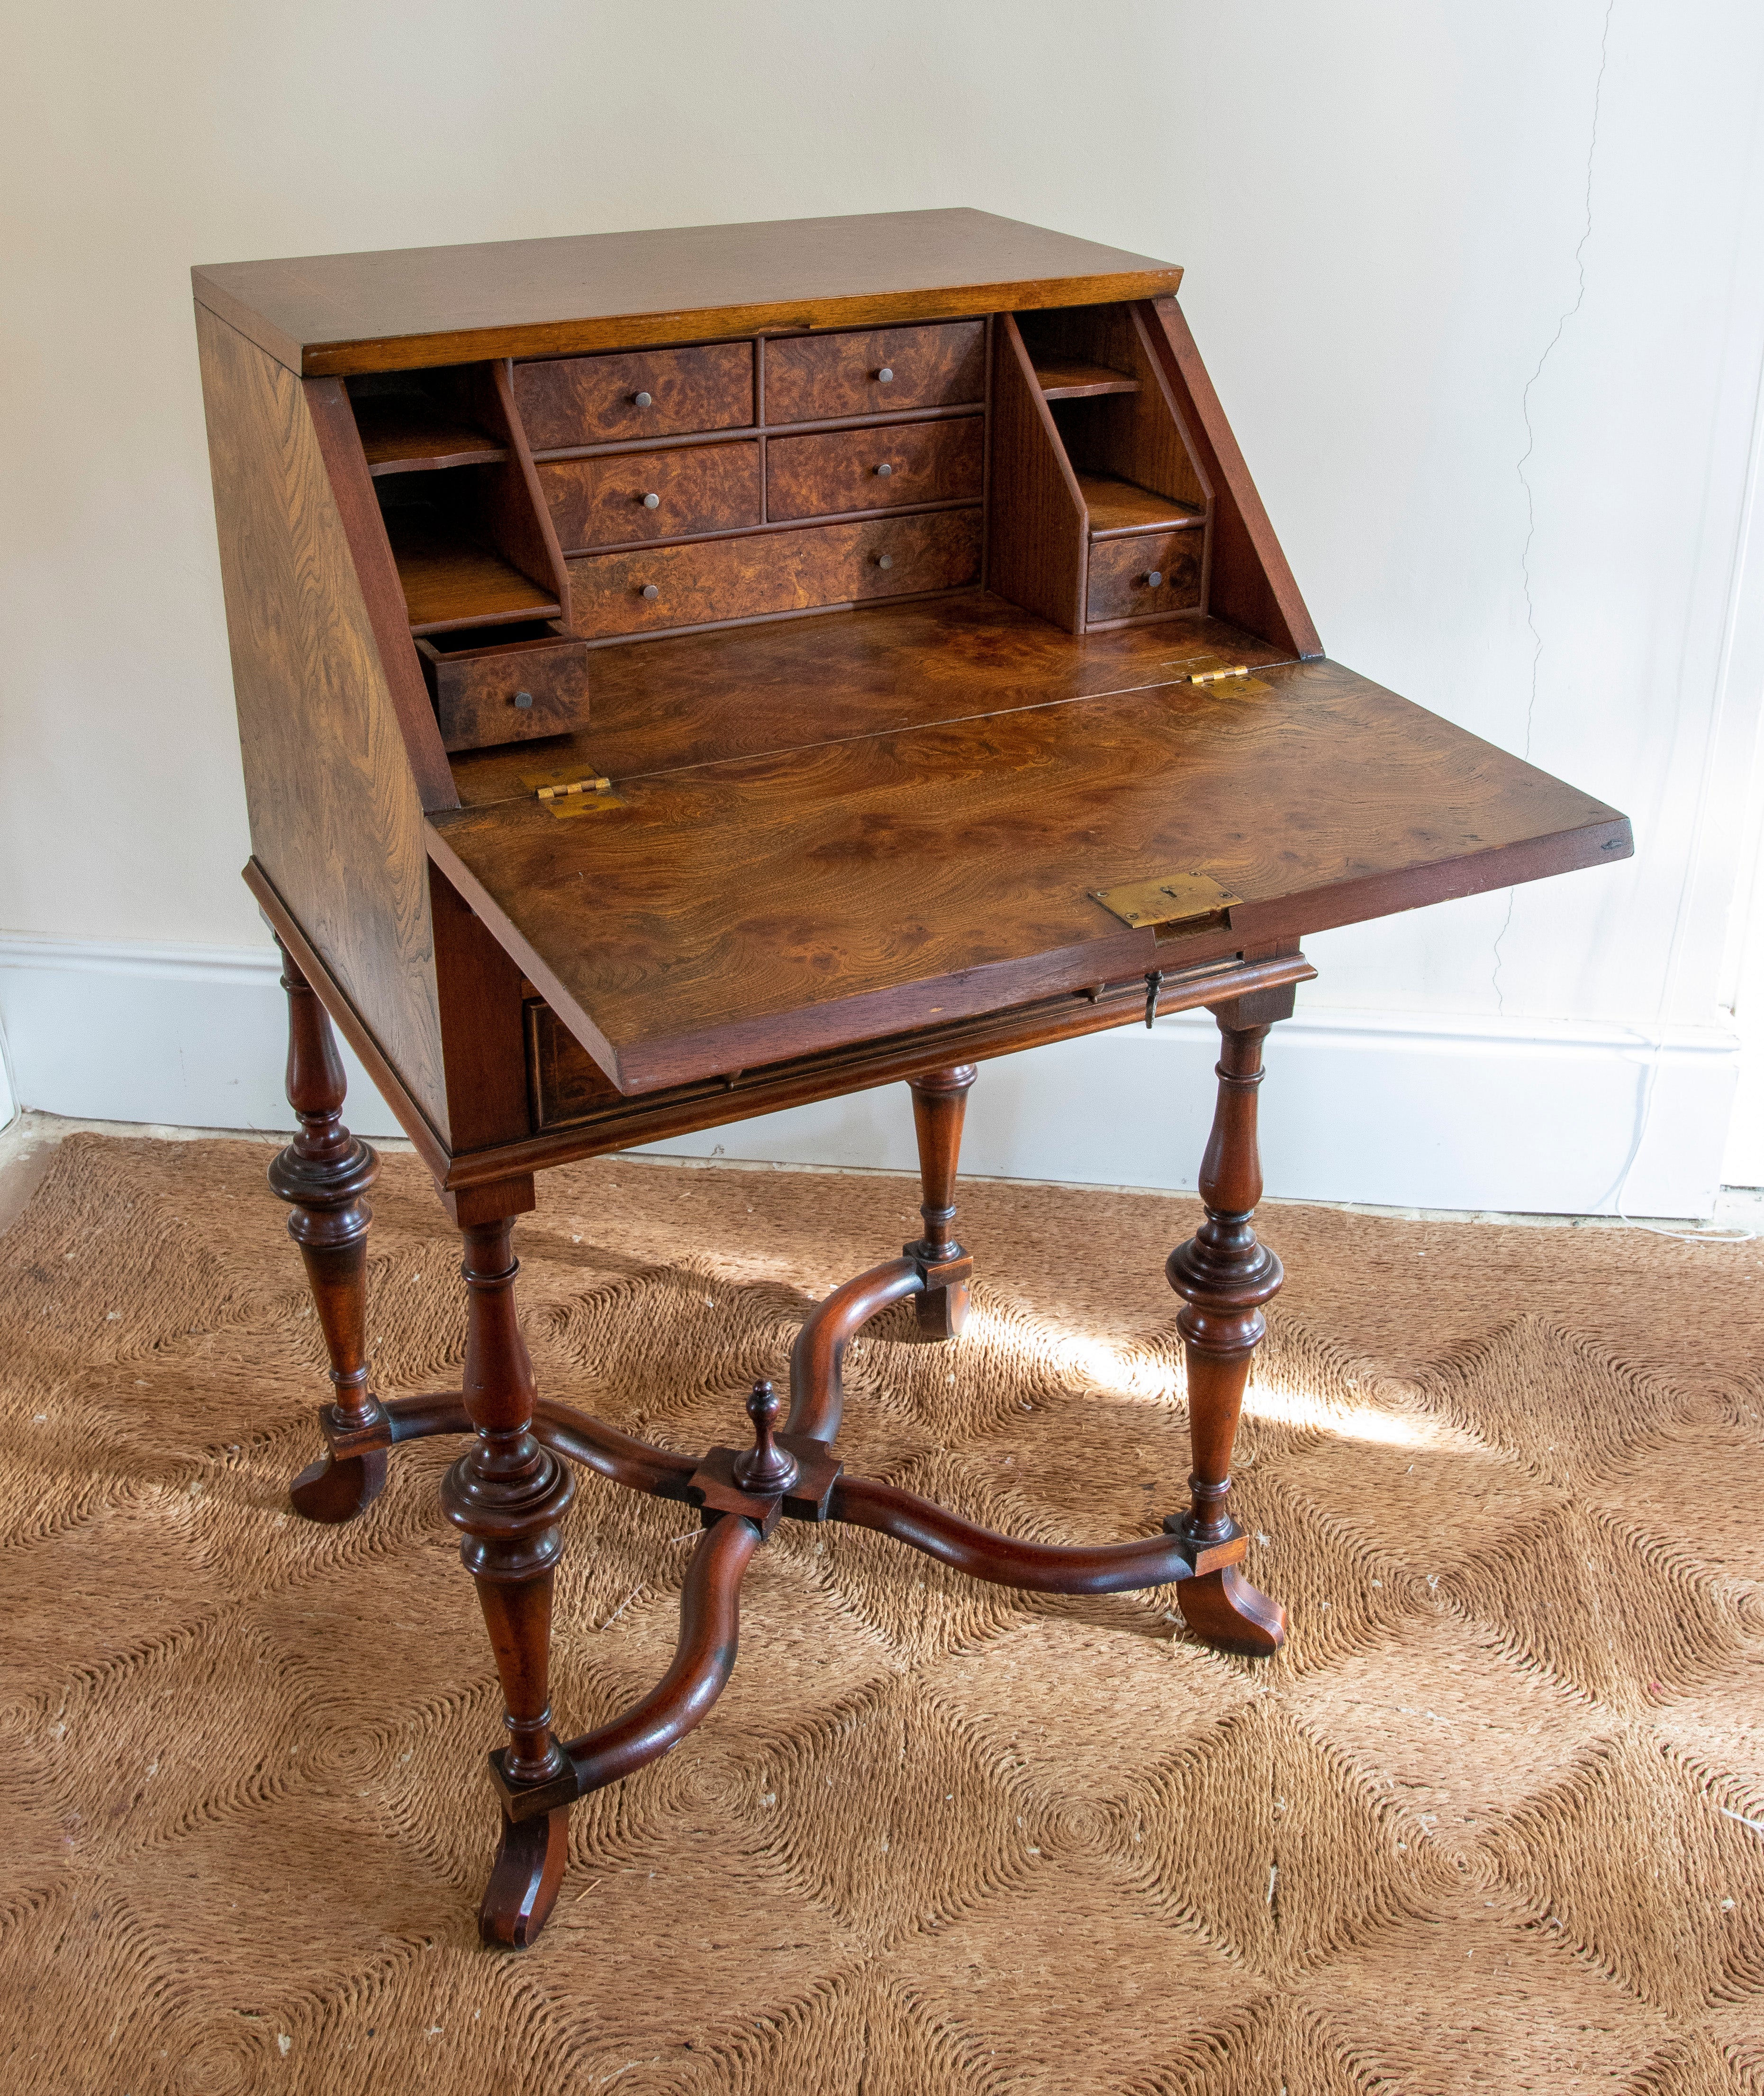 1980s English root wood writing desk with door and drawers.